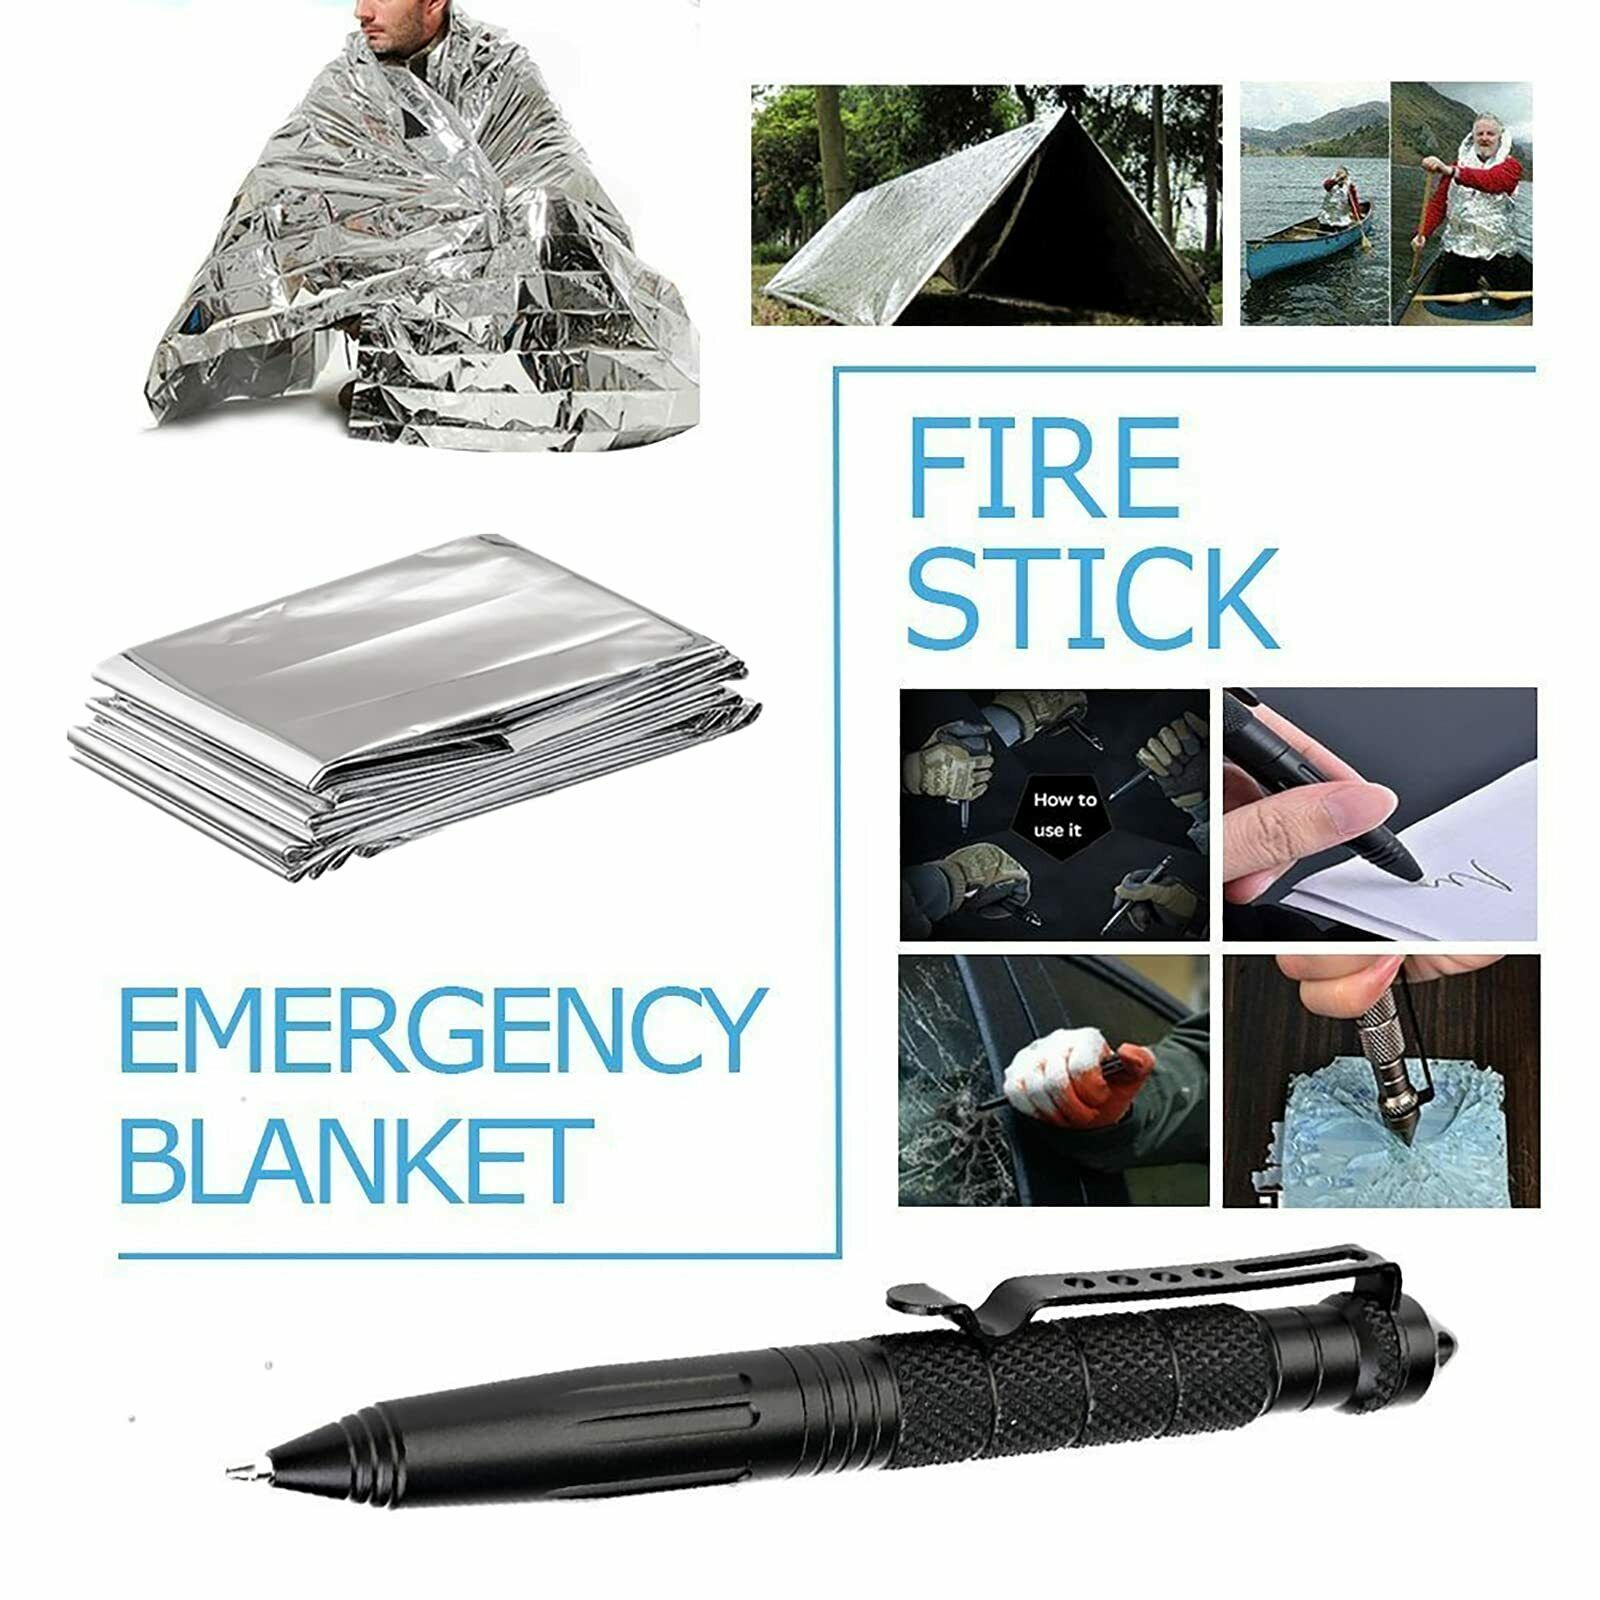 KEPEAK Survival Kit, Survival Gear and Equipment 14 in 1